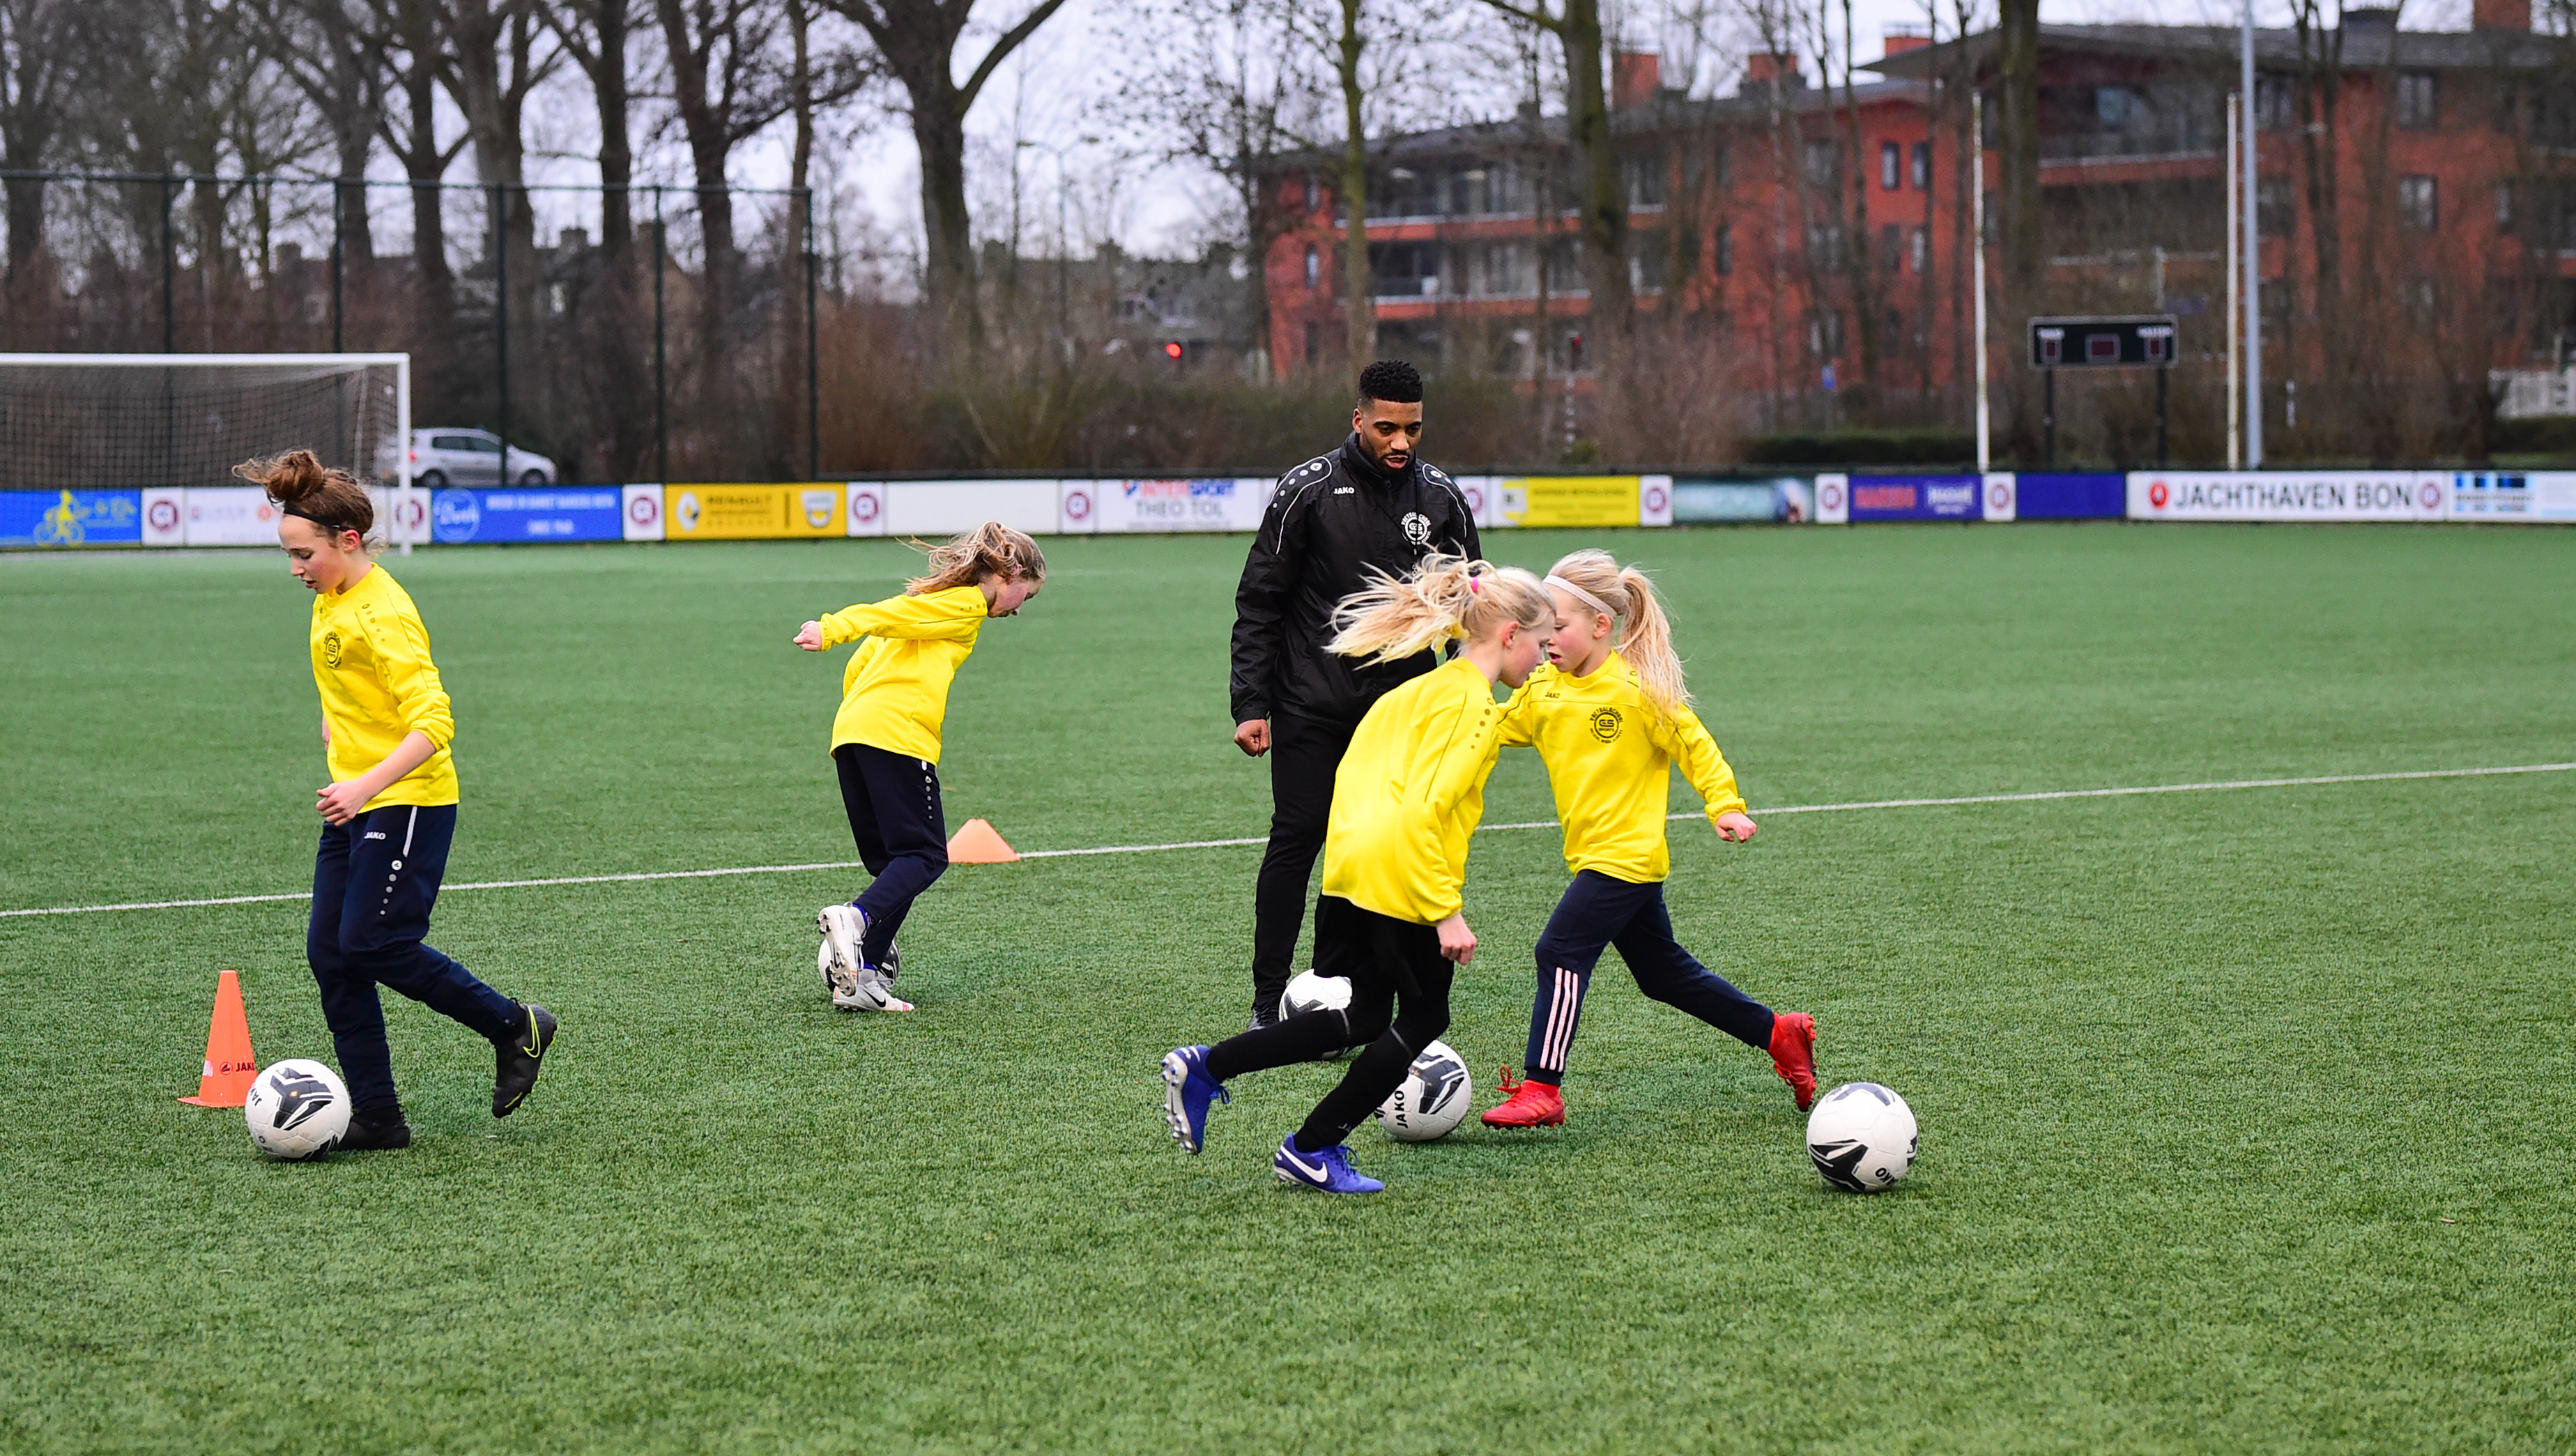 Voetbal maneuvres GS Sports